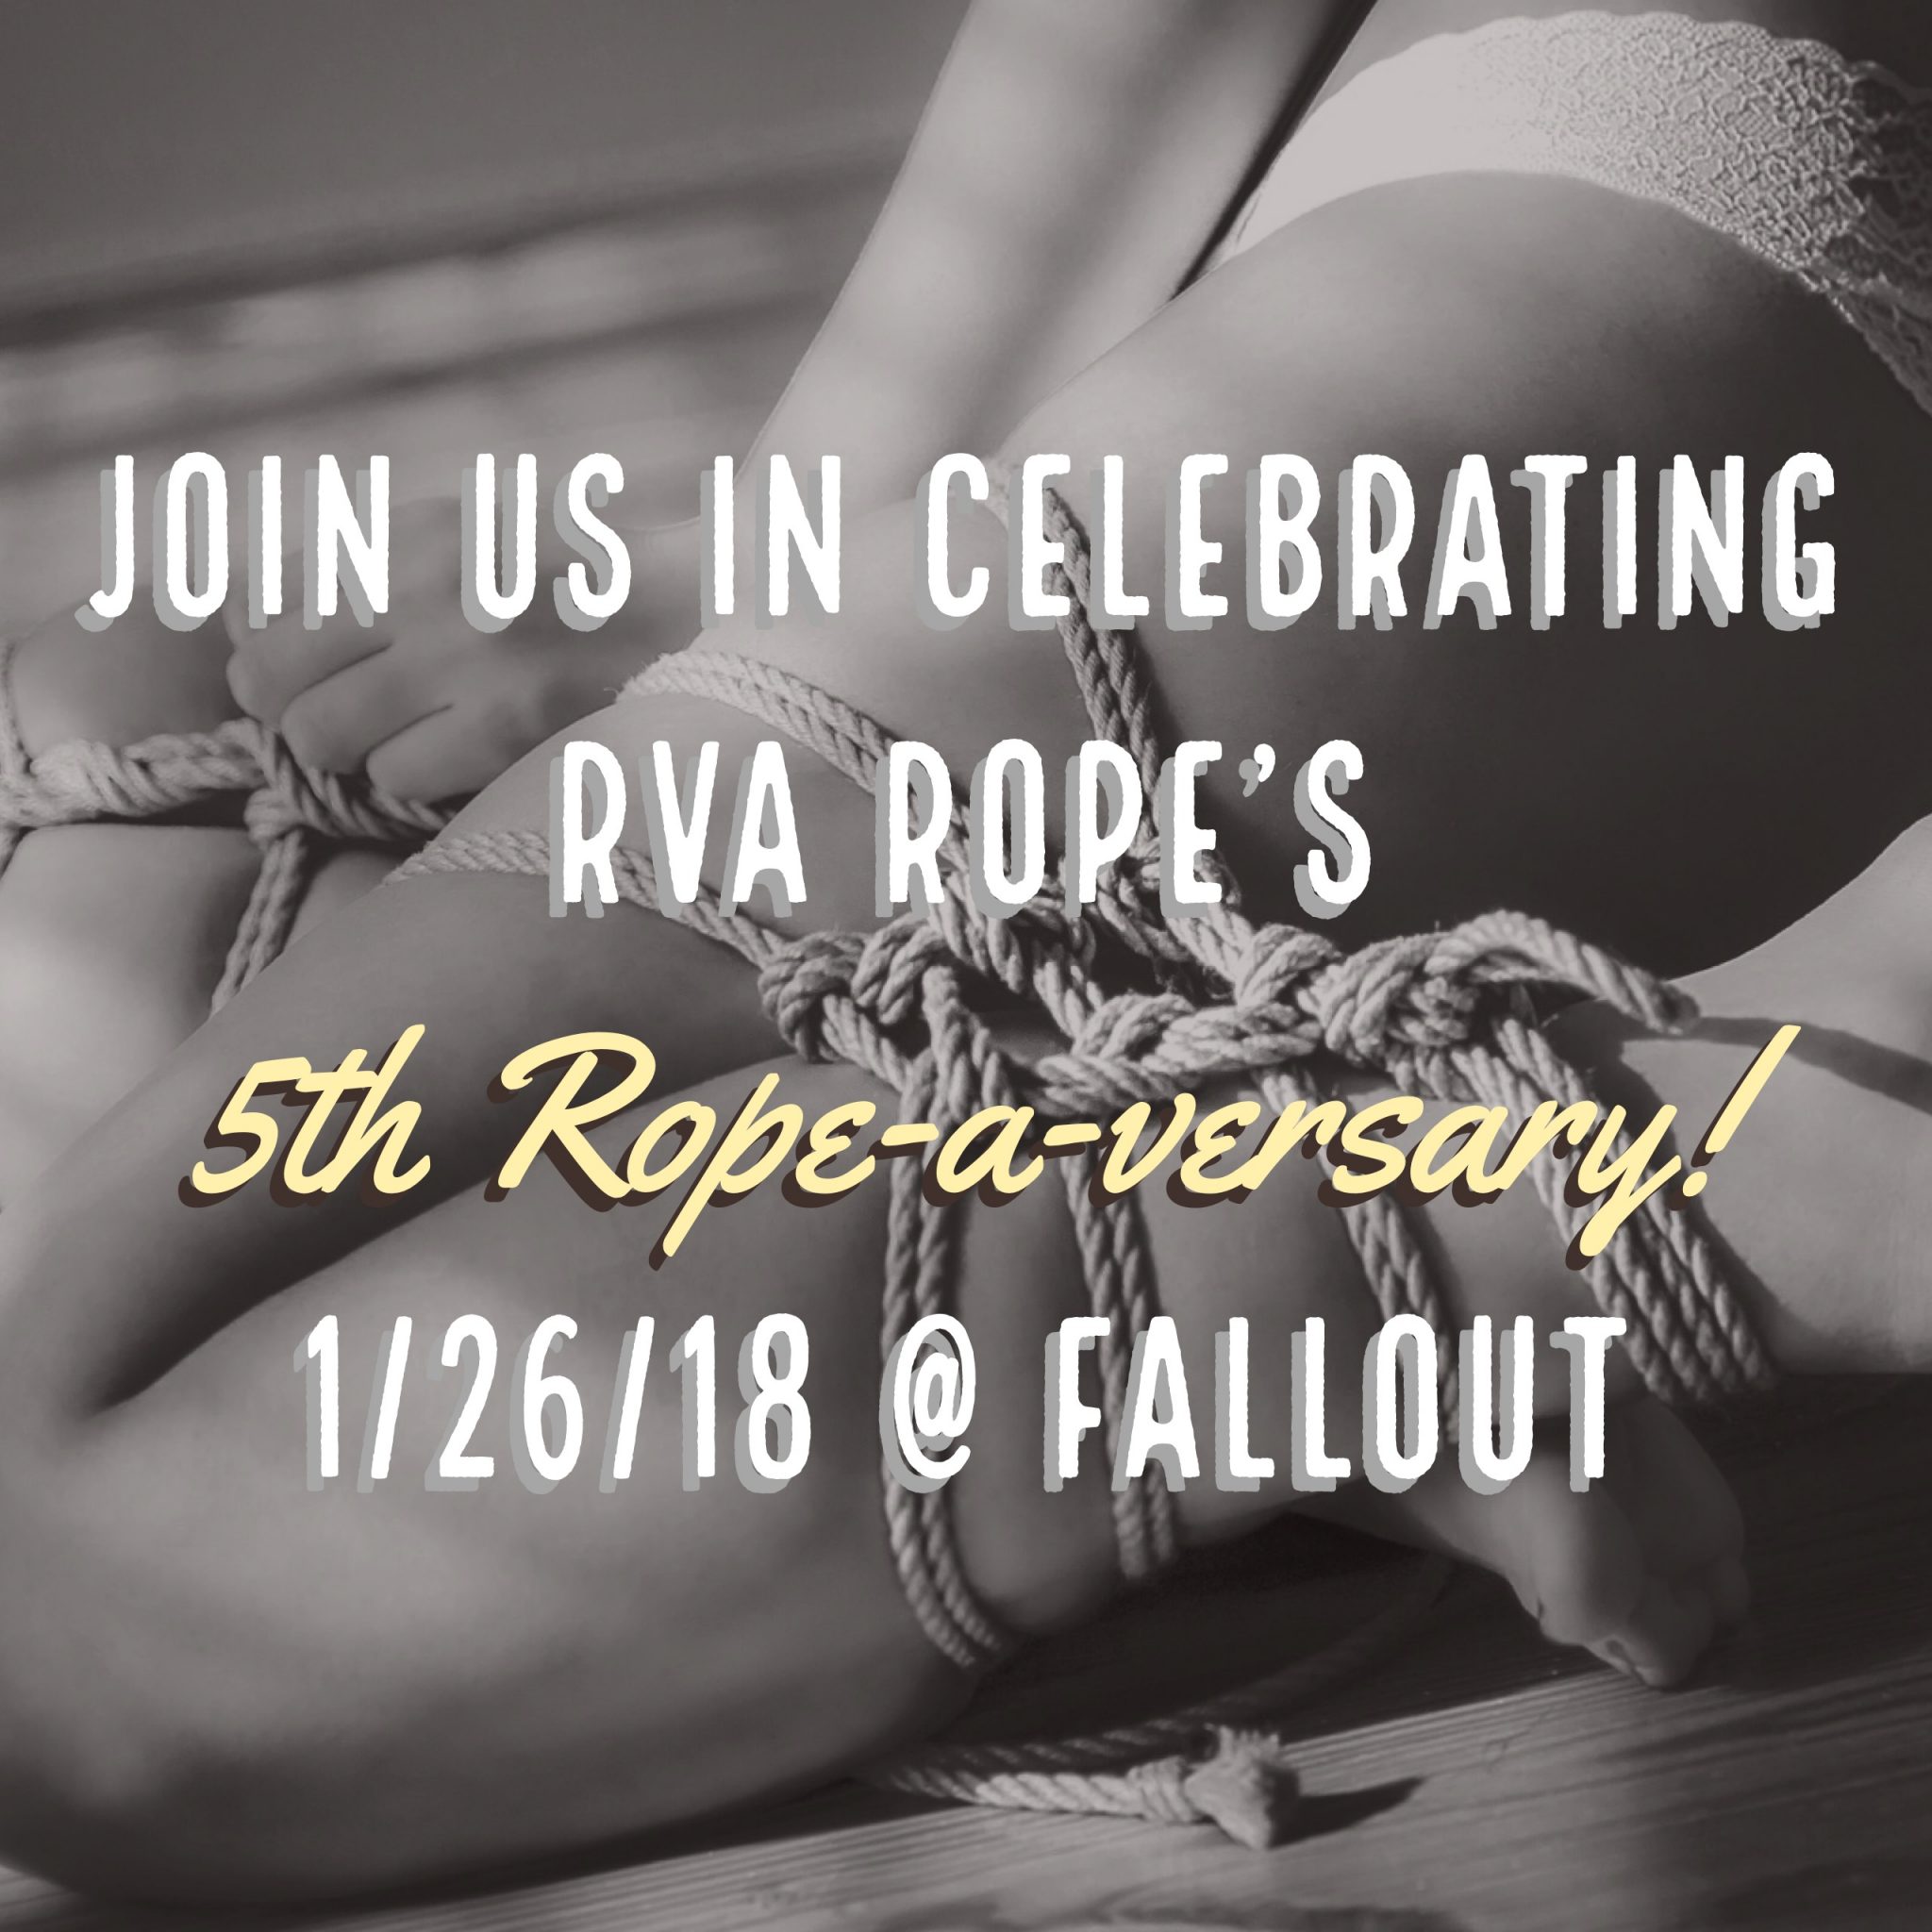 Join us for RVA Rope’s 5th Rope-a-versary Celebration!